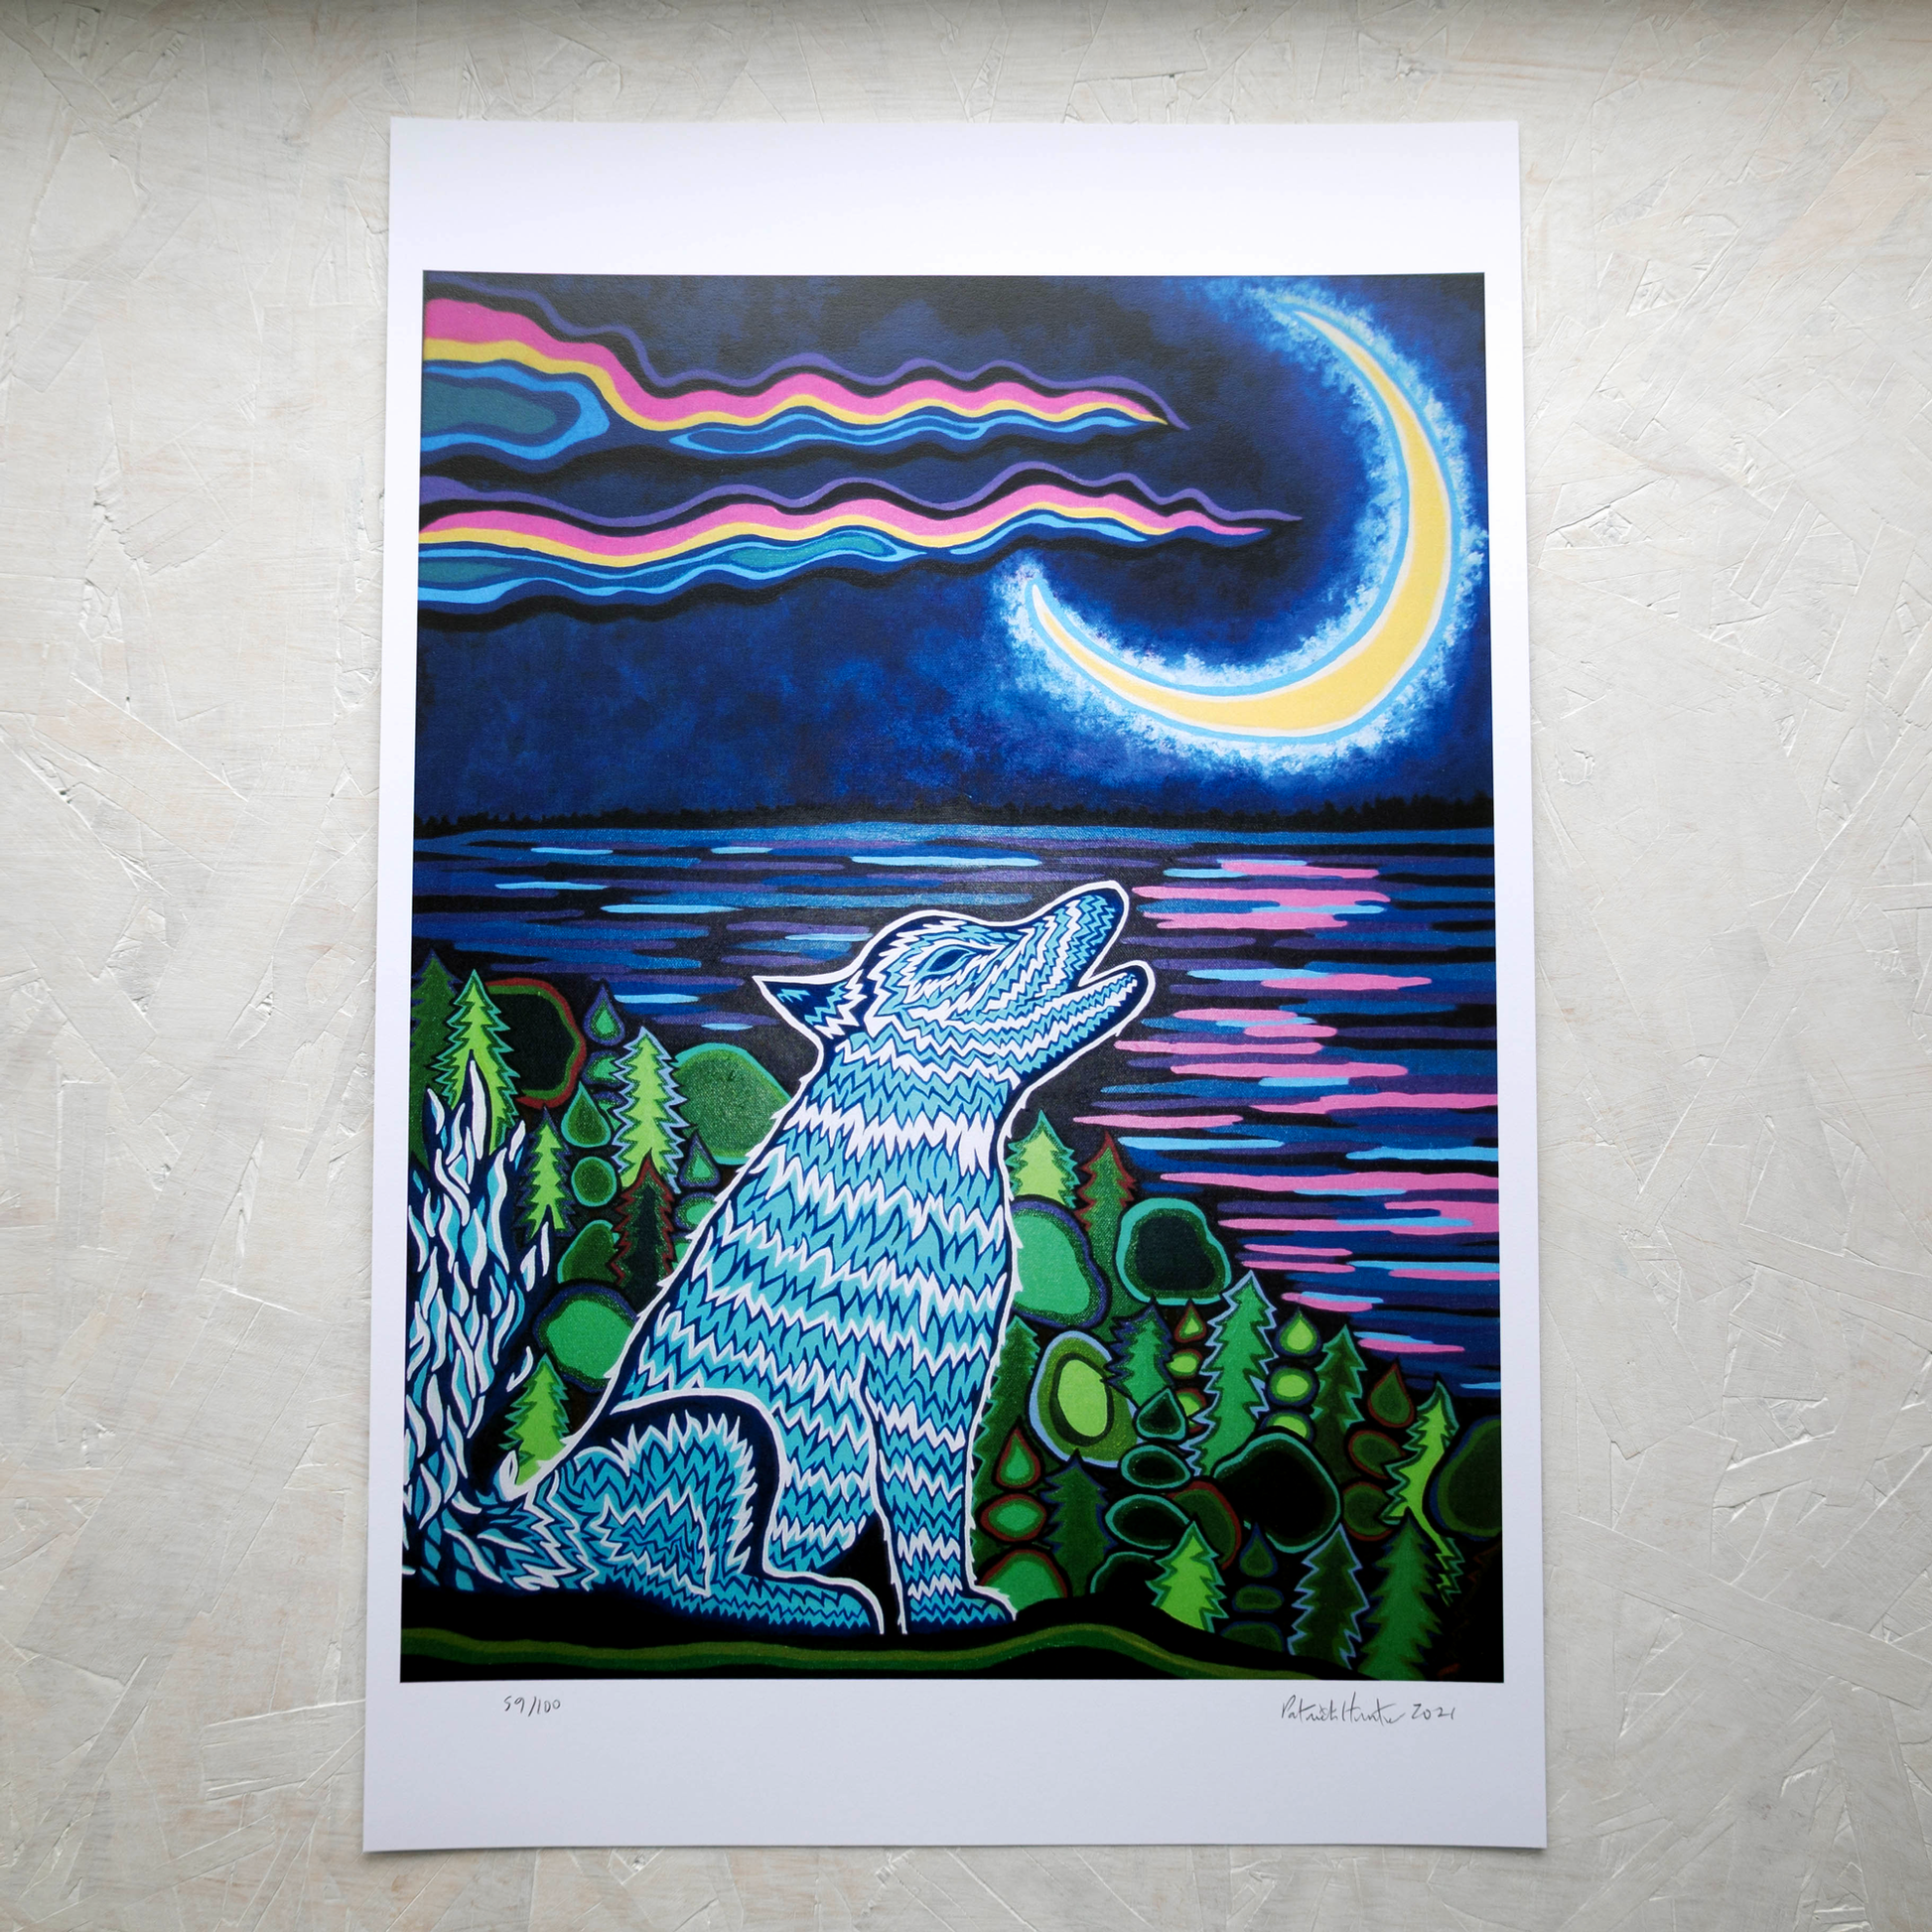 Print of Patrick Hunter's painting of a wolf howling at the moon in woodland art style.